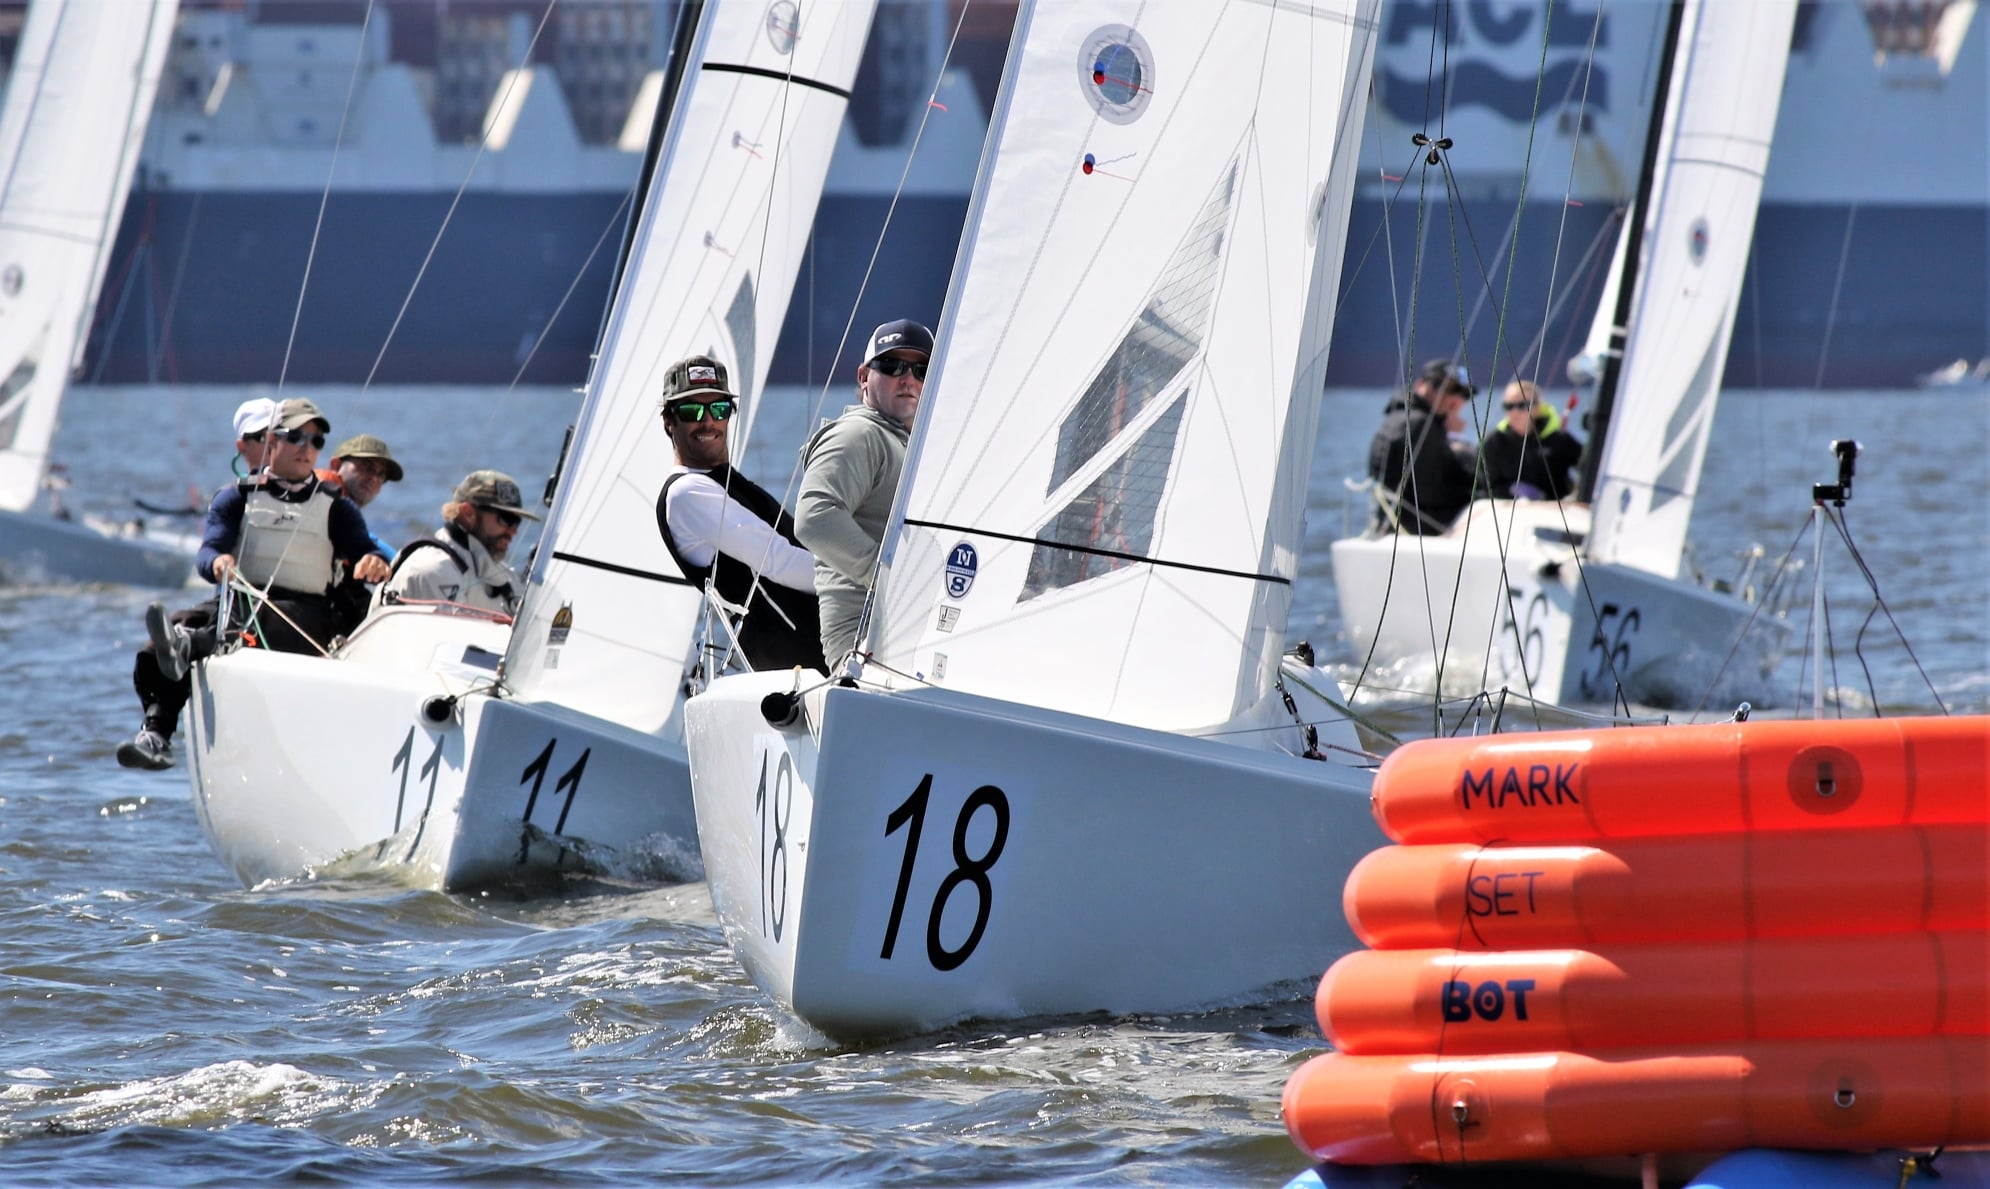  J/70  2021 North American Championship  Annapolis MD  Day 2  Peter Duncan leader after three races